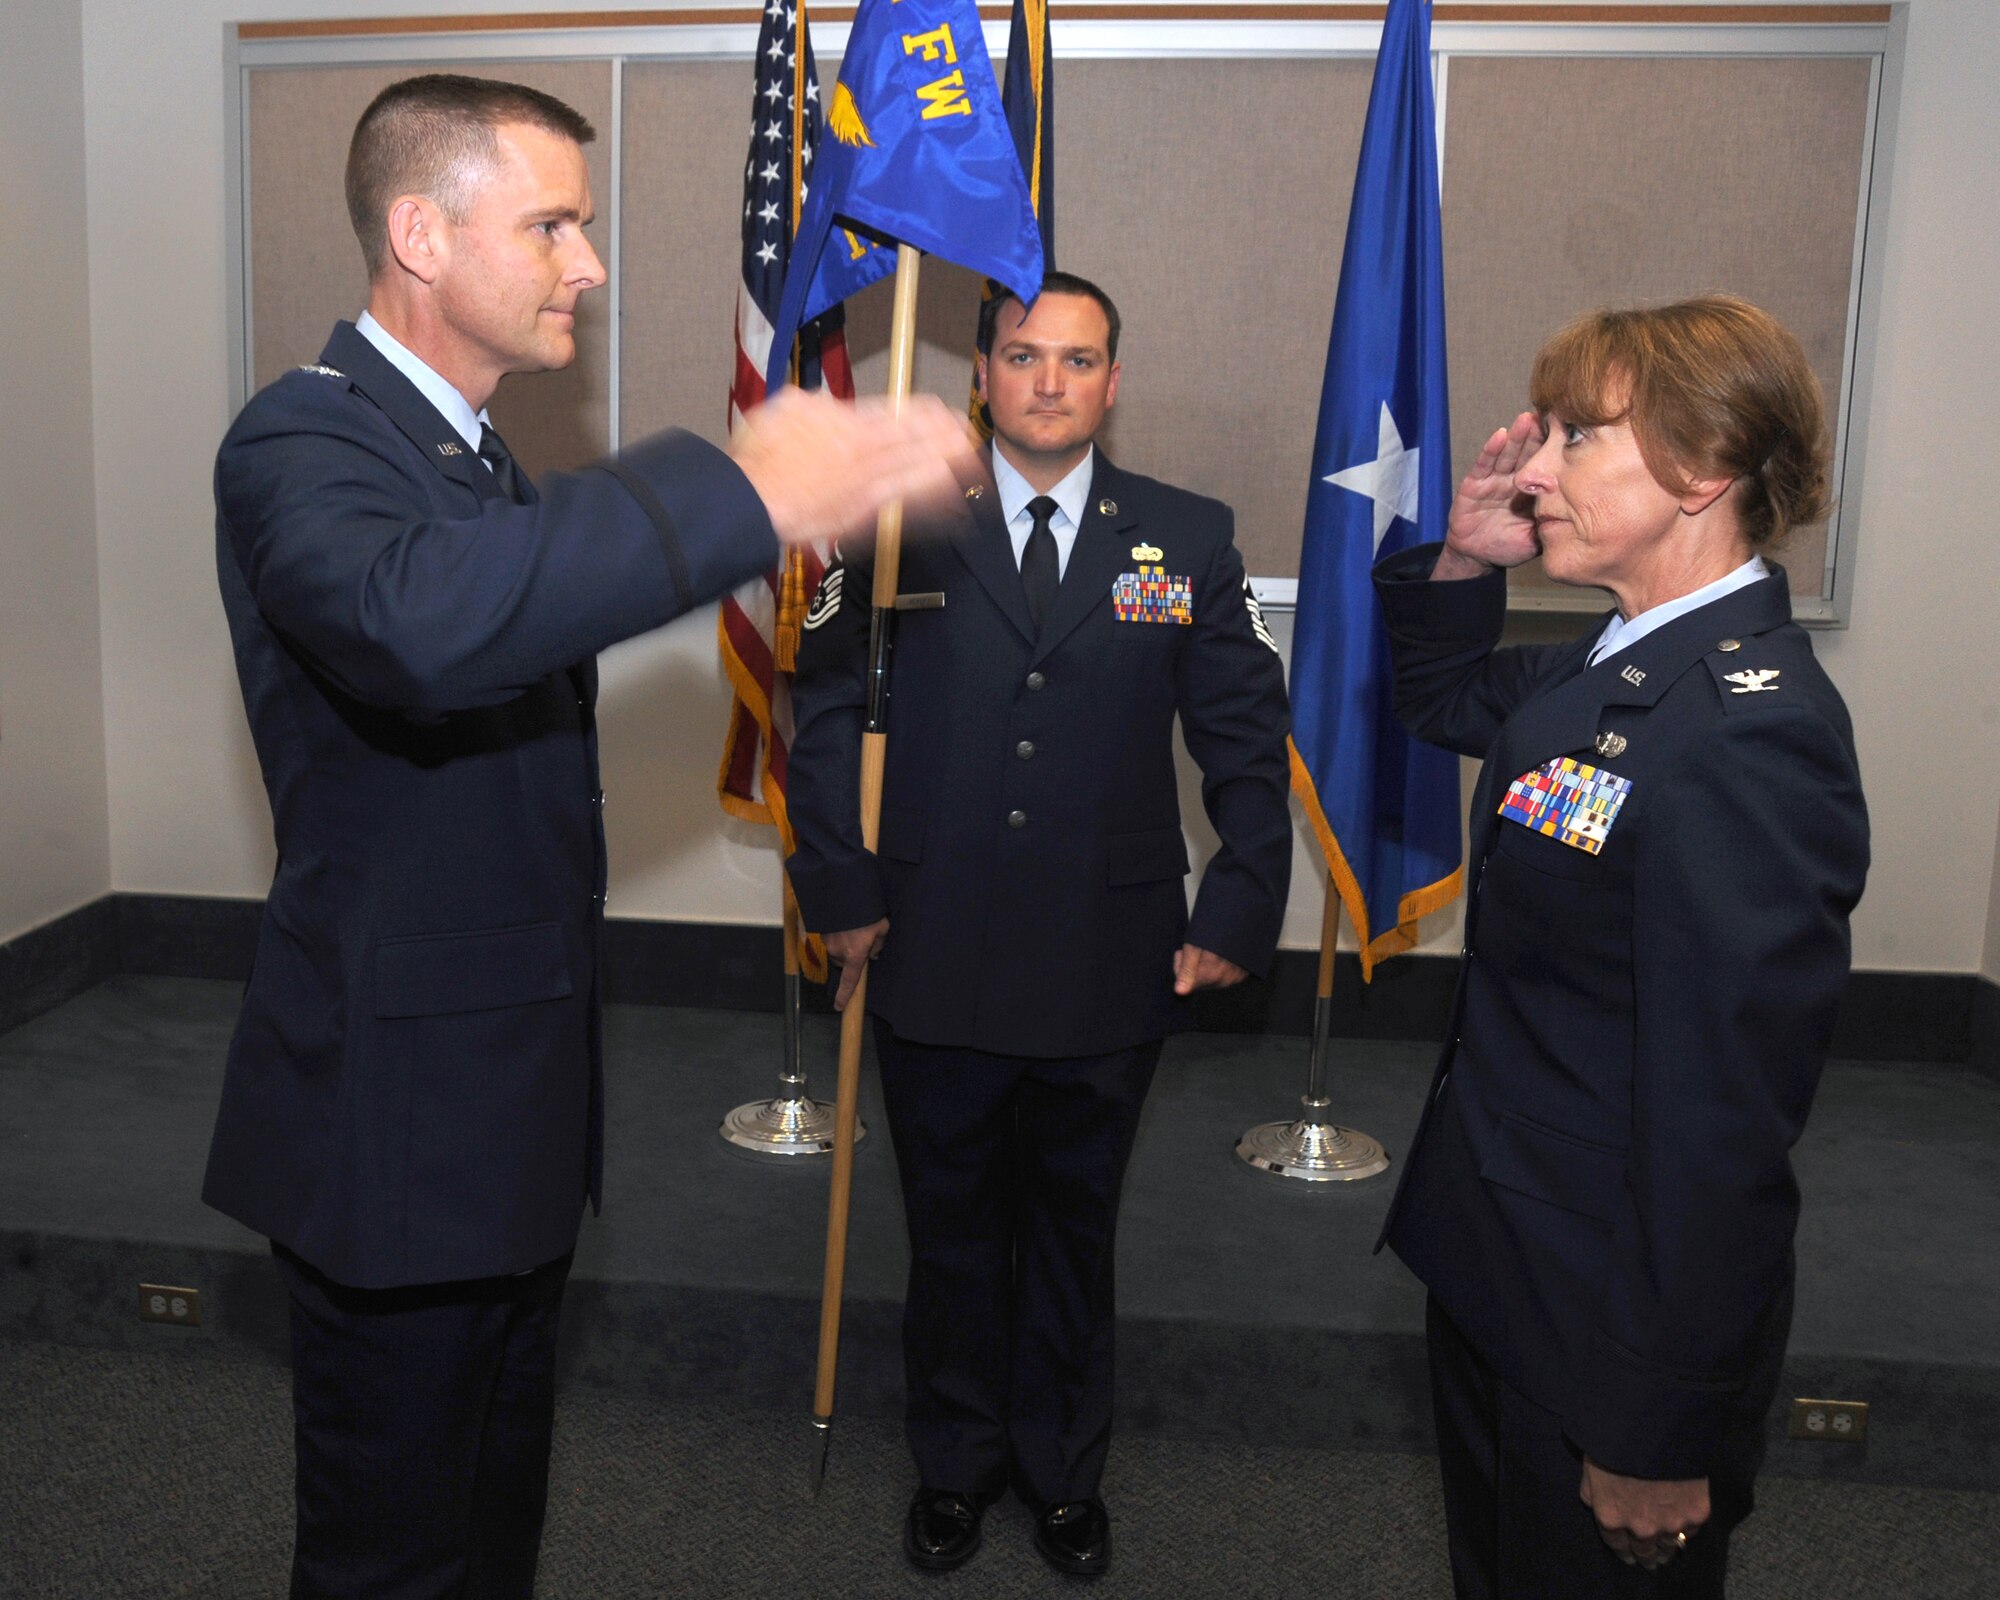 Col. Rick Wedan, 142nd Fighter Wing Commander, left, returns the salute form the new 142nd MSG Commander Col. Donna Prigmore, right, during the Mission Support Group Change of Command Ceremony, Portland Air National Guard Base, Ore., Aug. 3, 2014. (U.S. Air National Guard photo by Tech. Sgt. John Hughel, 142nd Fighter Wing Public Affairs/Released)